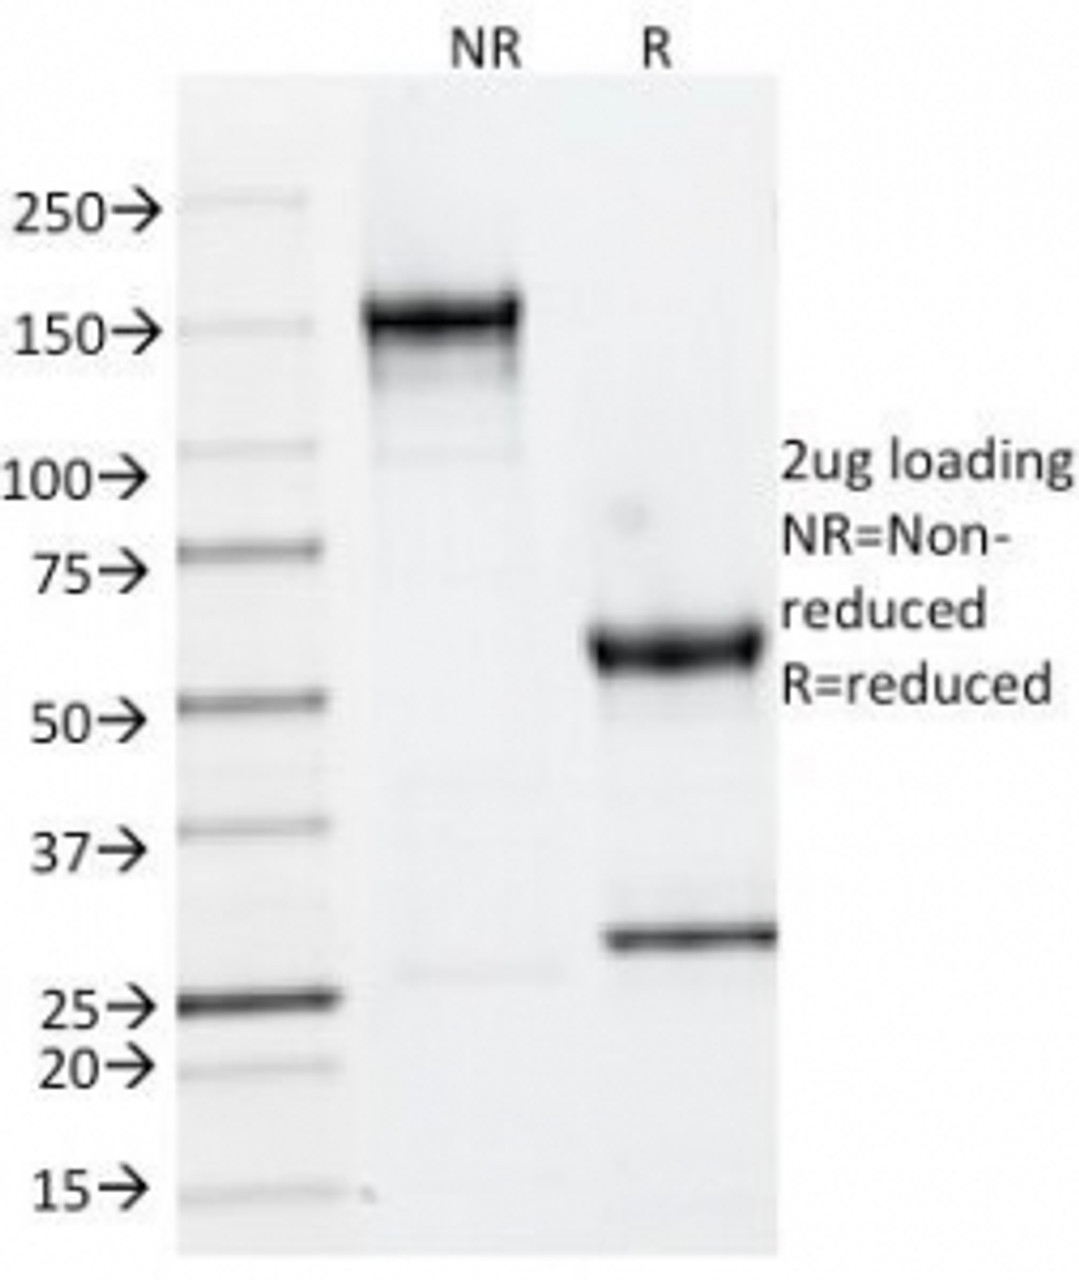 SDS-PAGE Analysis of Purified, BSA-Free Cytokeratin 6 Antibody (clone LHK6) . Confirmation of Integrity and Purity of the Antibody.